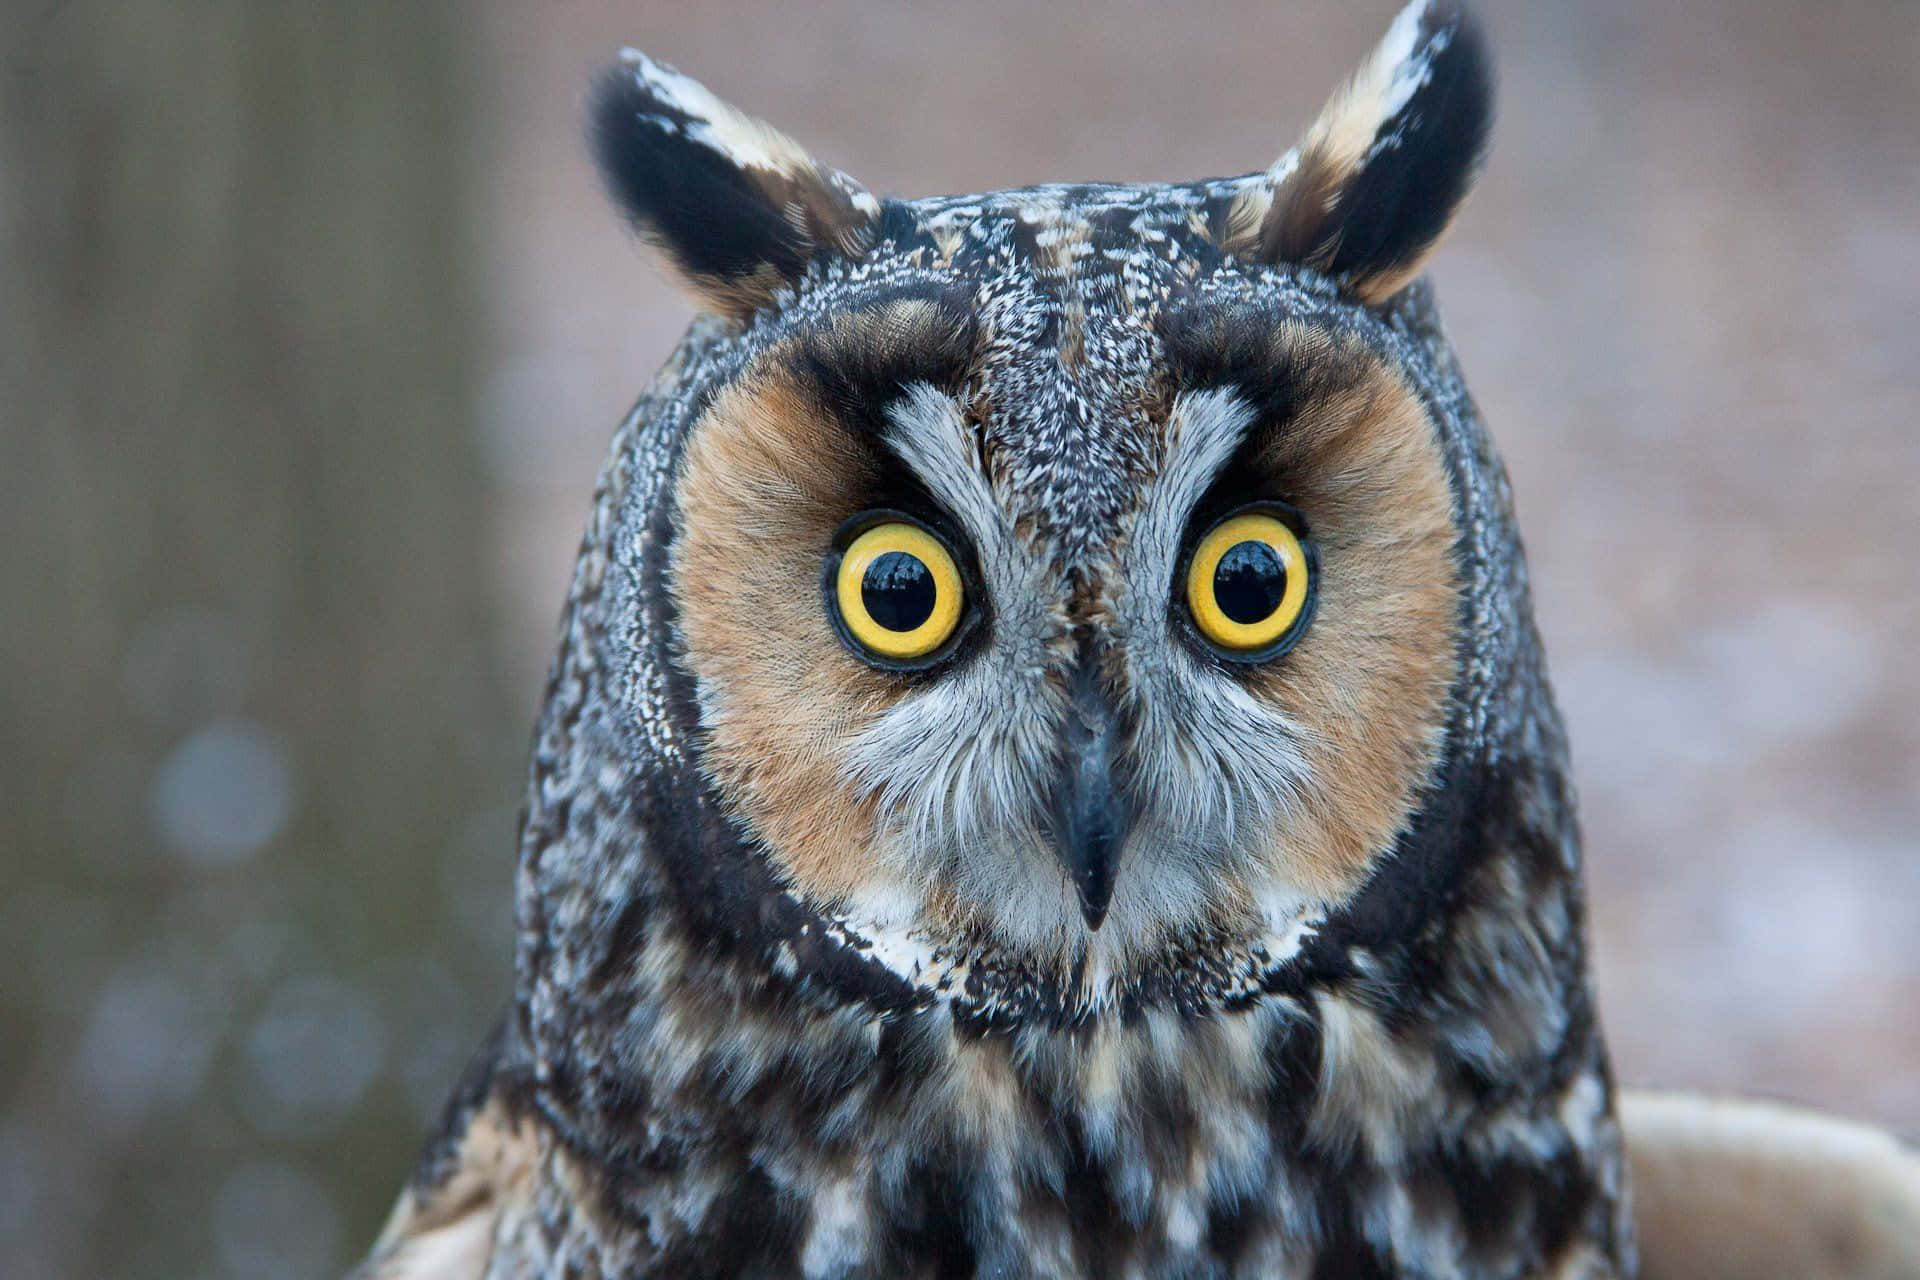 A close-up of the majestic, yellow eyes of a great horned owl.